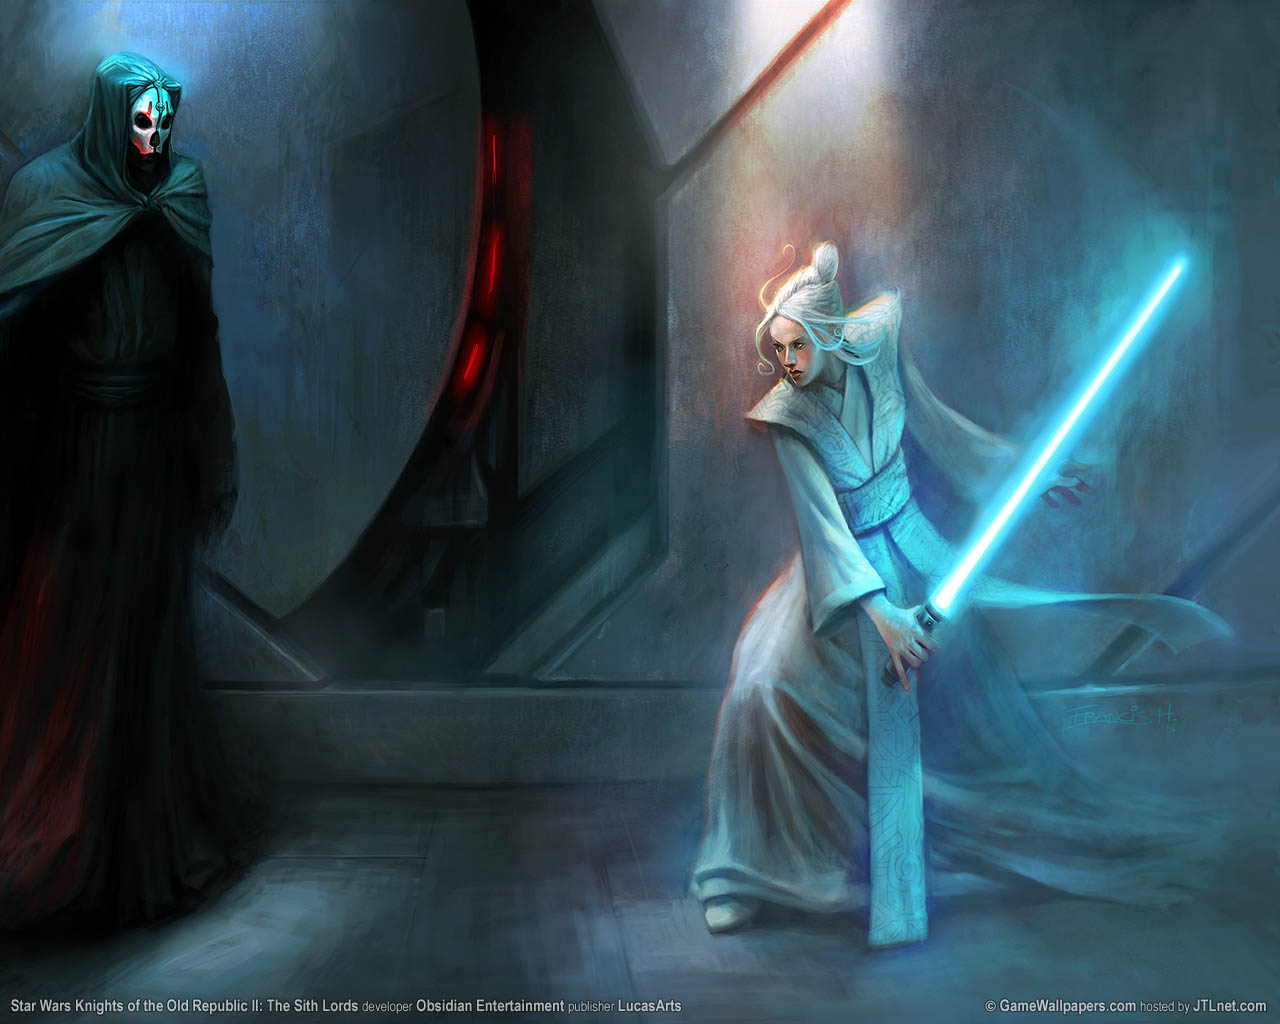 Star Wars%3A Knights of the Old Republic 2 achtergrond 01 1280x1024